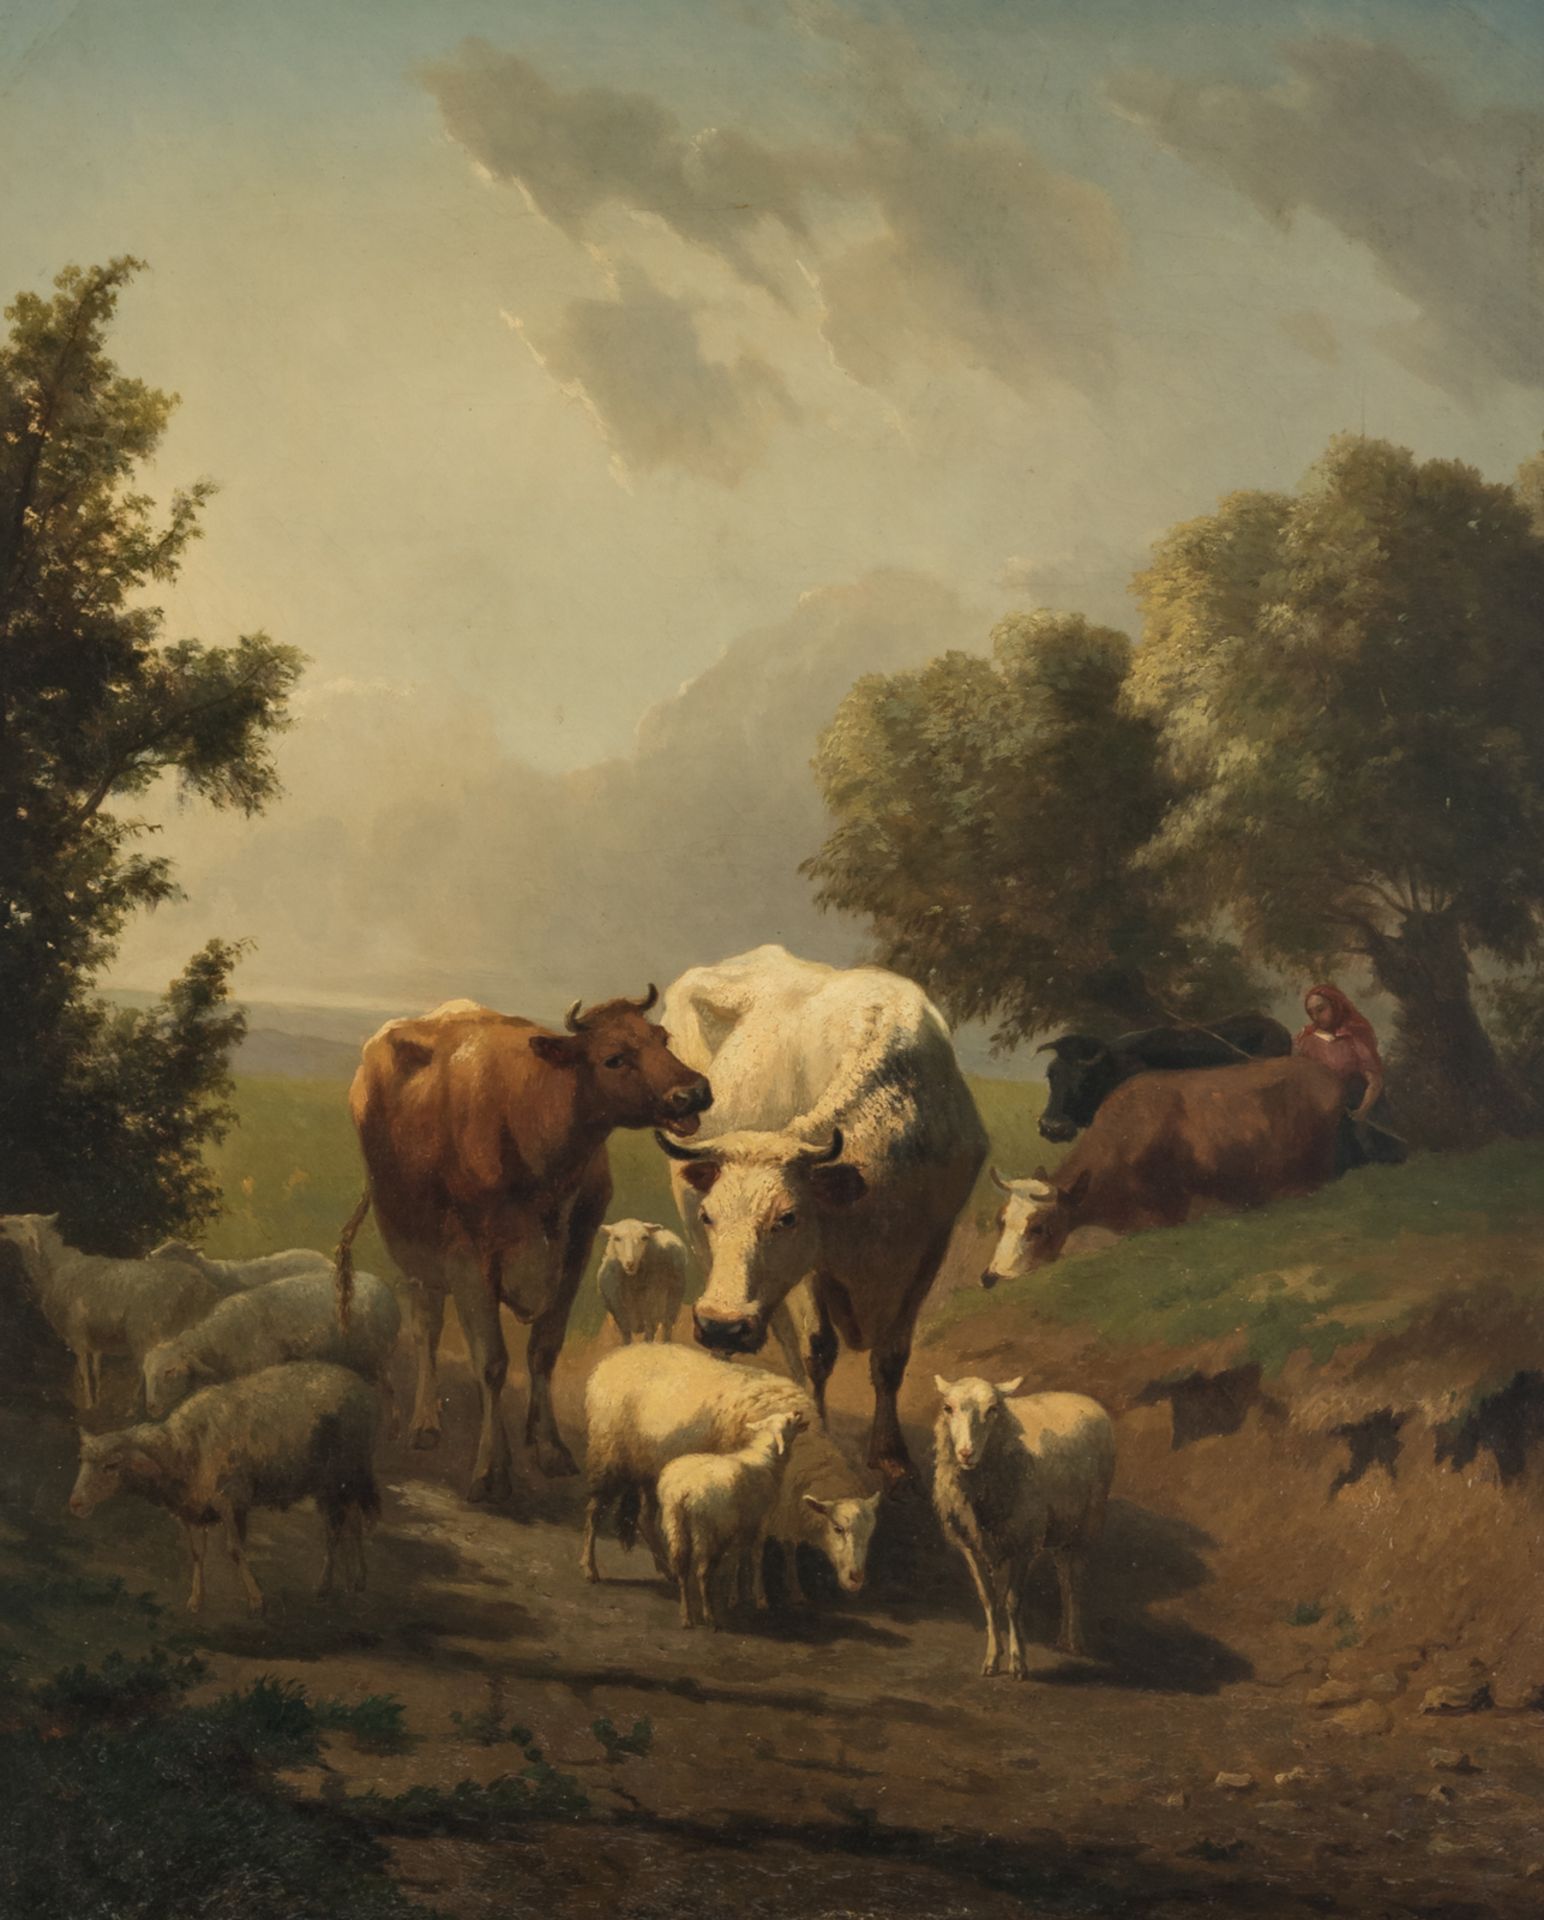 Verhuest V., a shepherdess with cattle in a landscape, oil on canvas, 56 x 67,5 cm